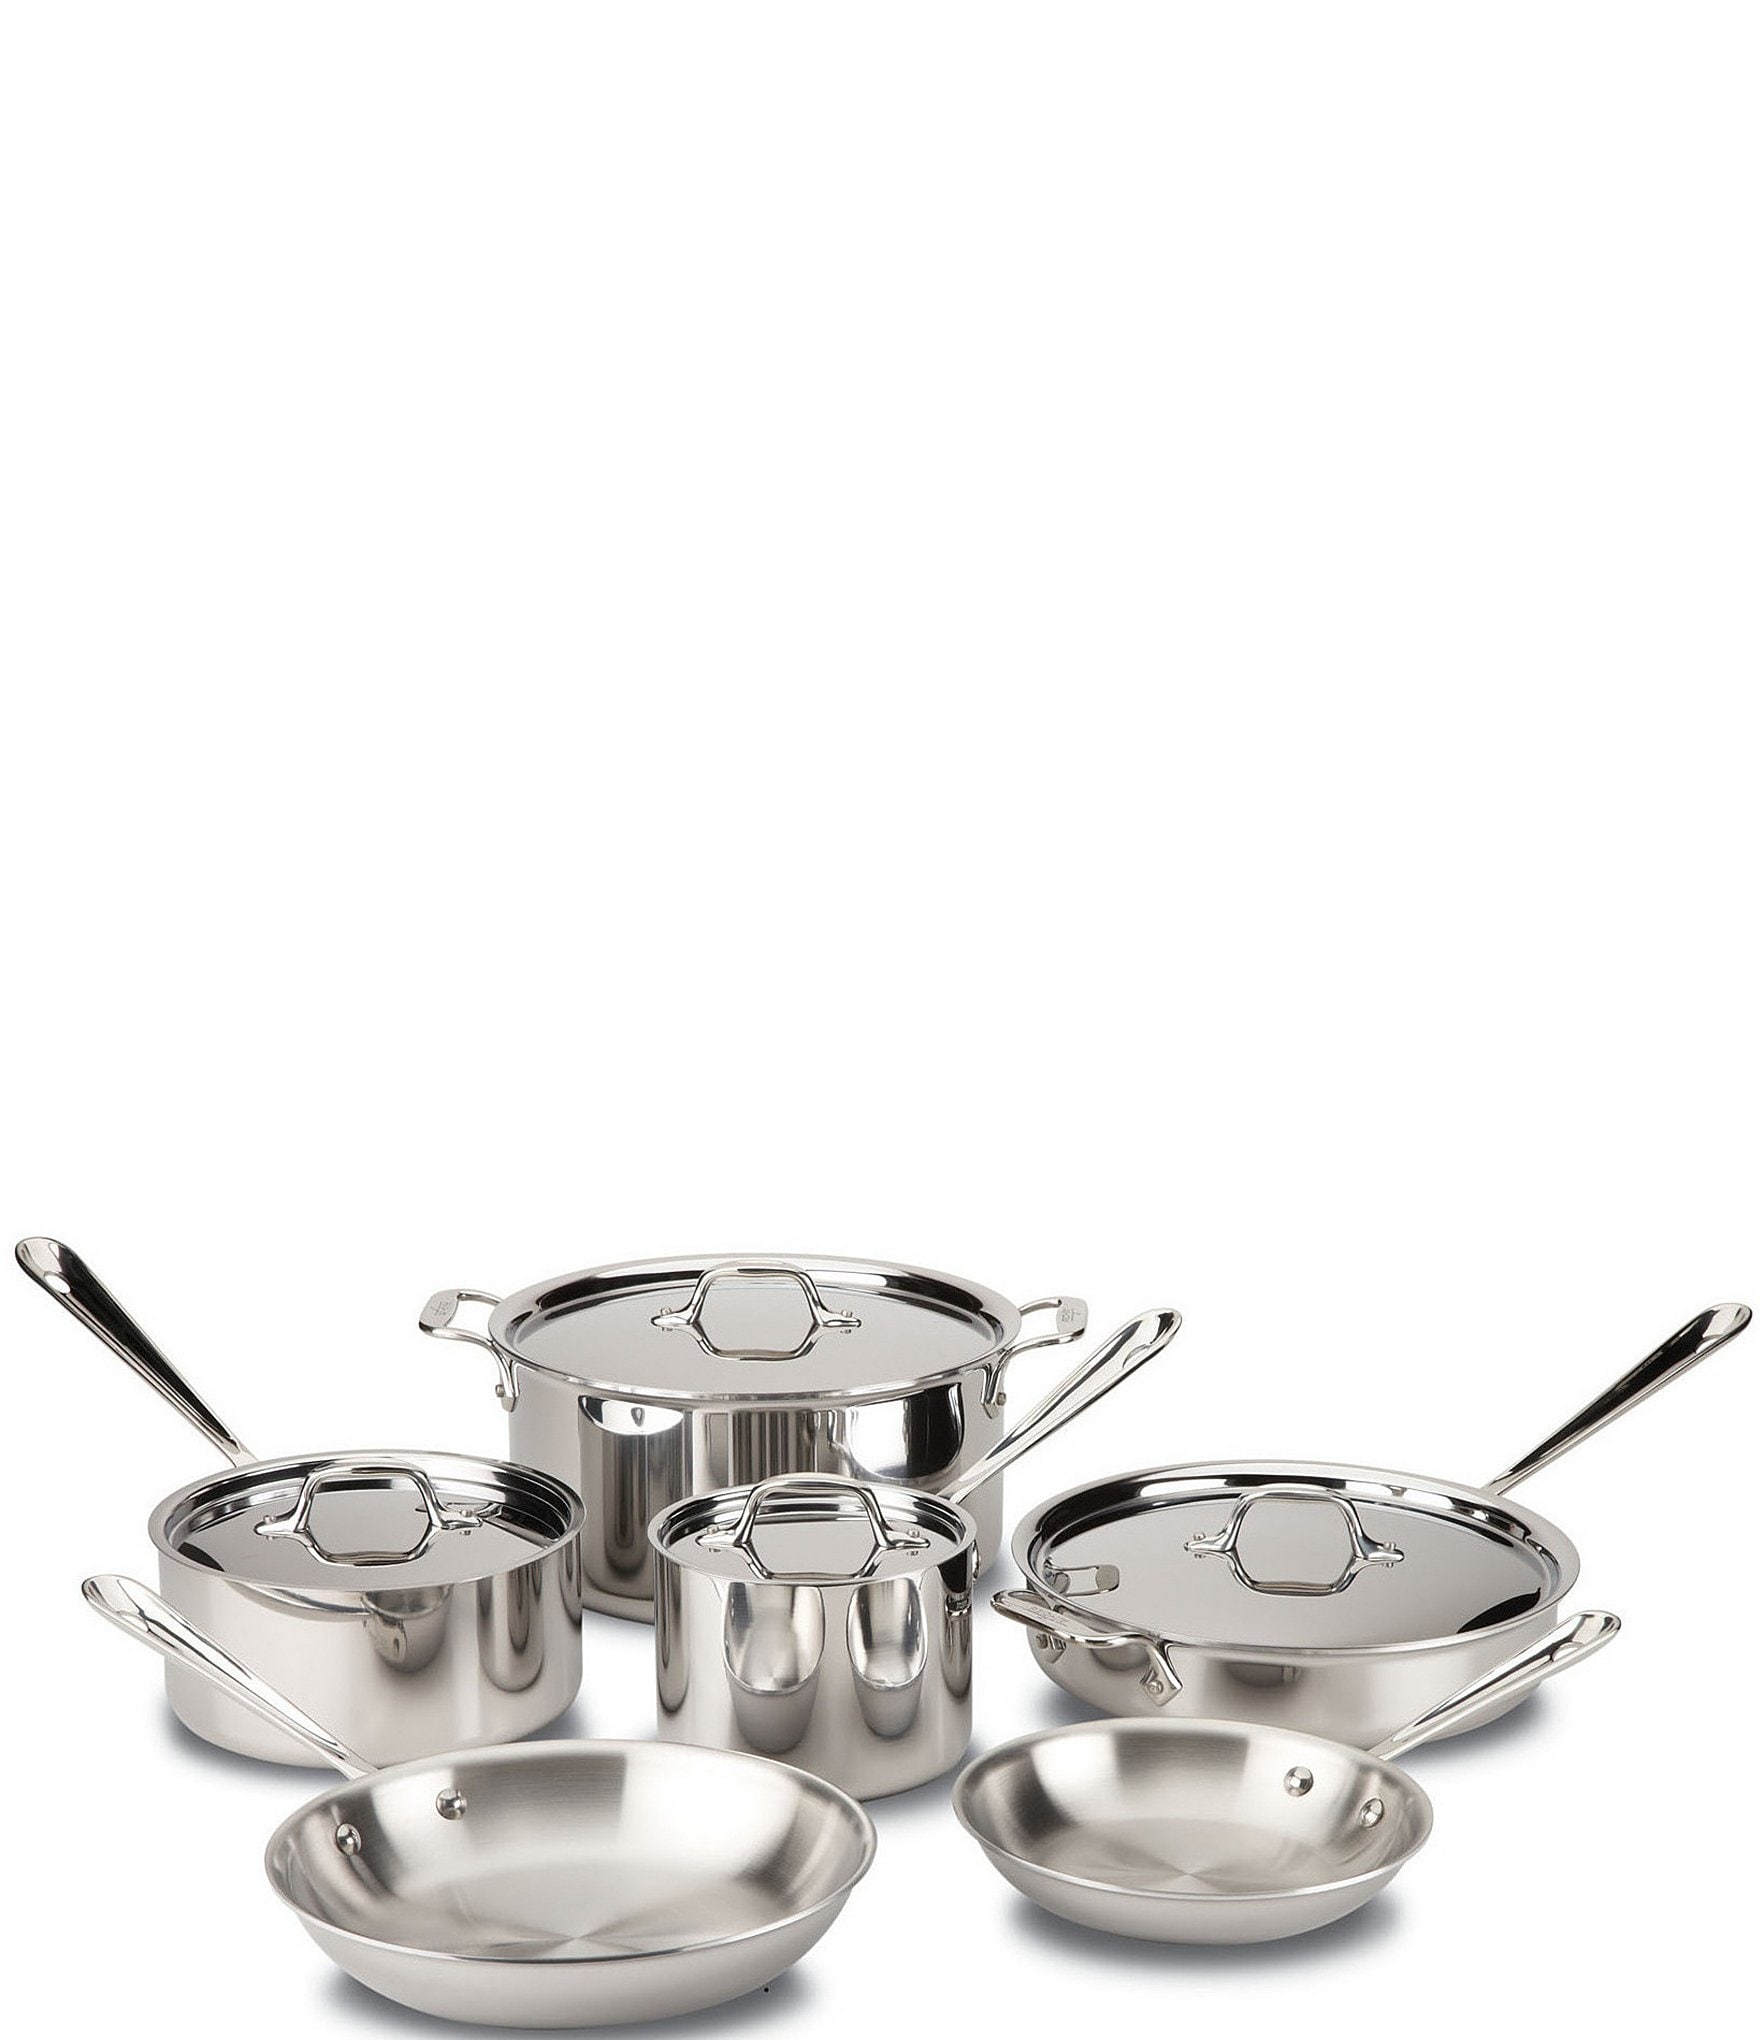 All clad D3 10 piece stainless steel cookware set BRAND NEW 